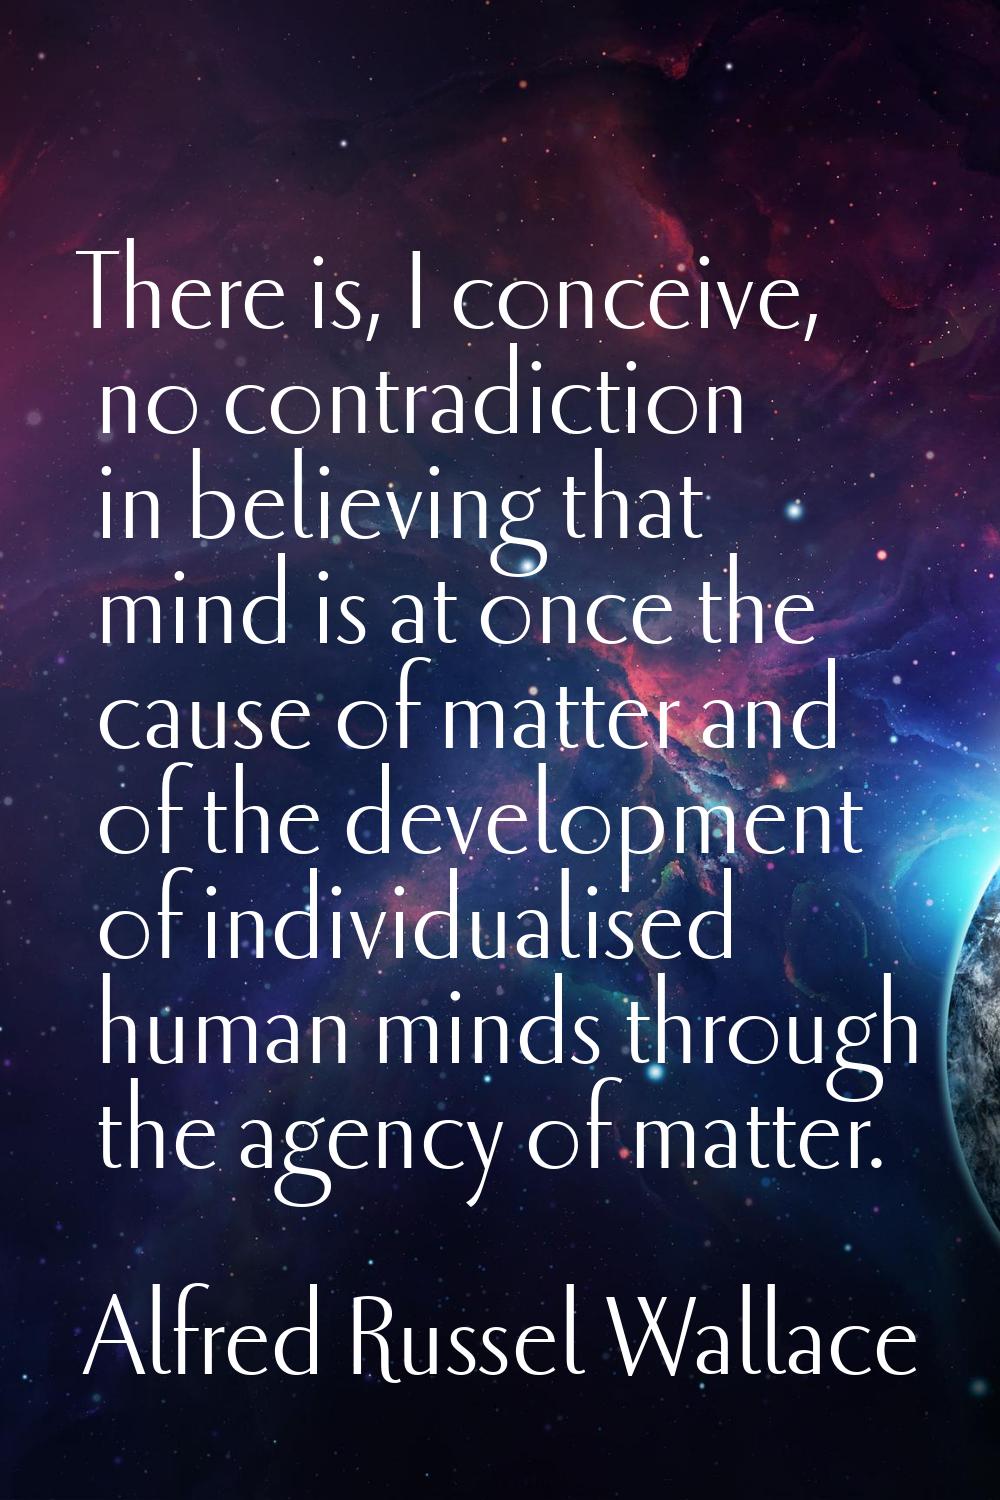 There is, I conceive, no contradiction in believing that mind is at once the cause of matter and of